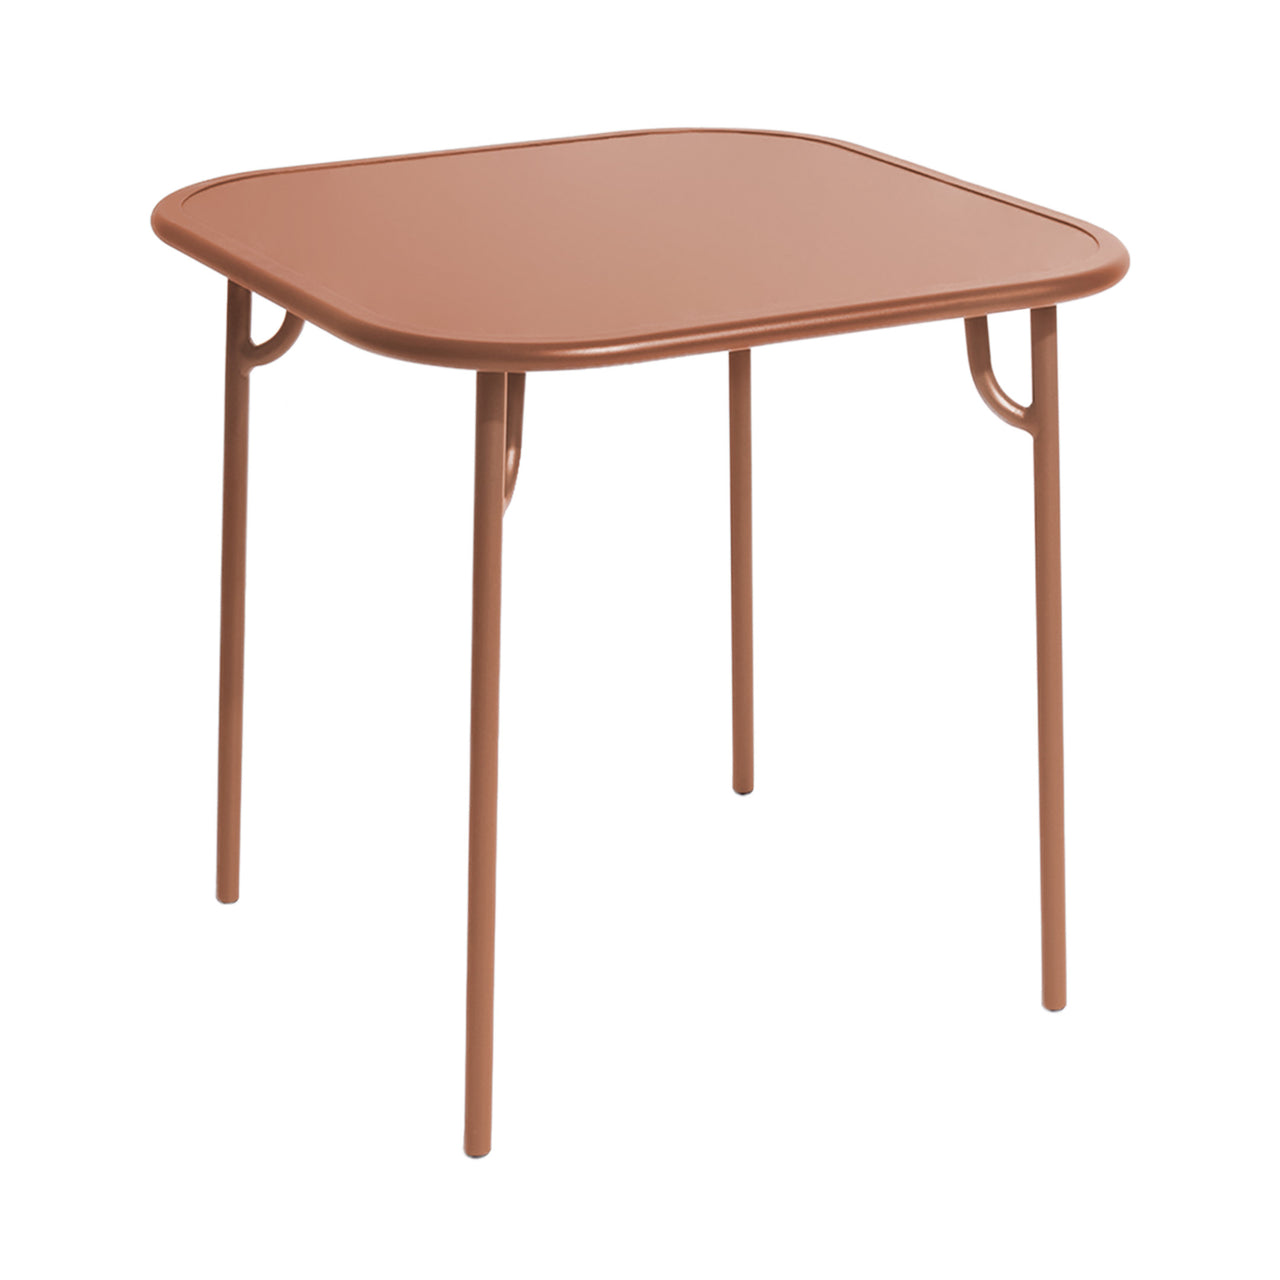 Week-End Square Dining Table: Terracotta